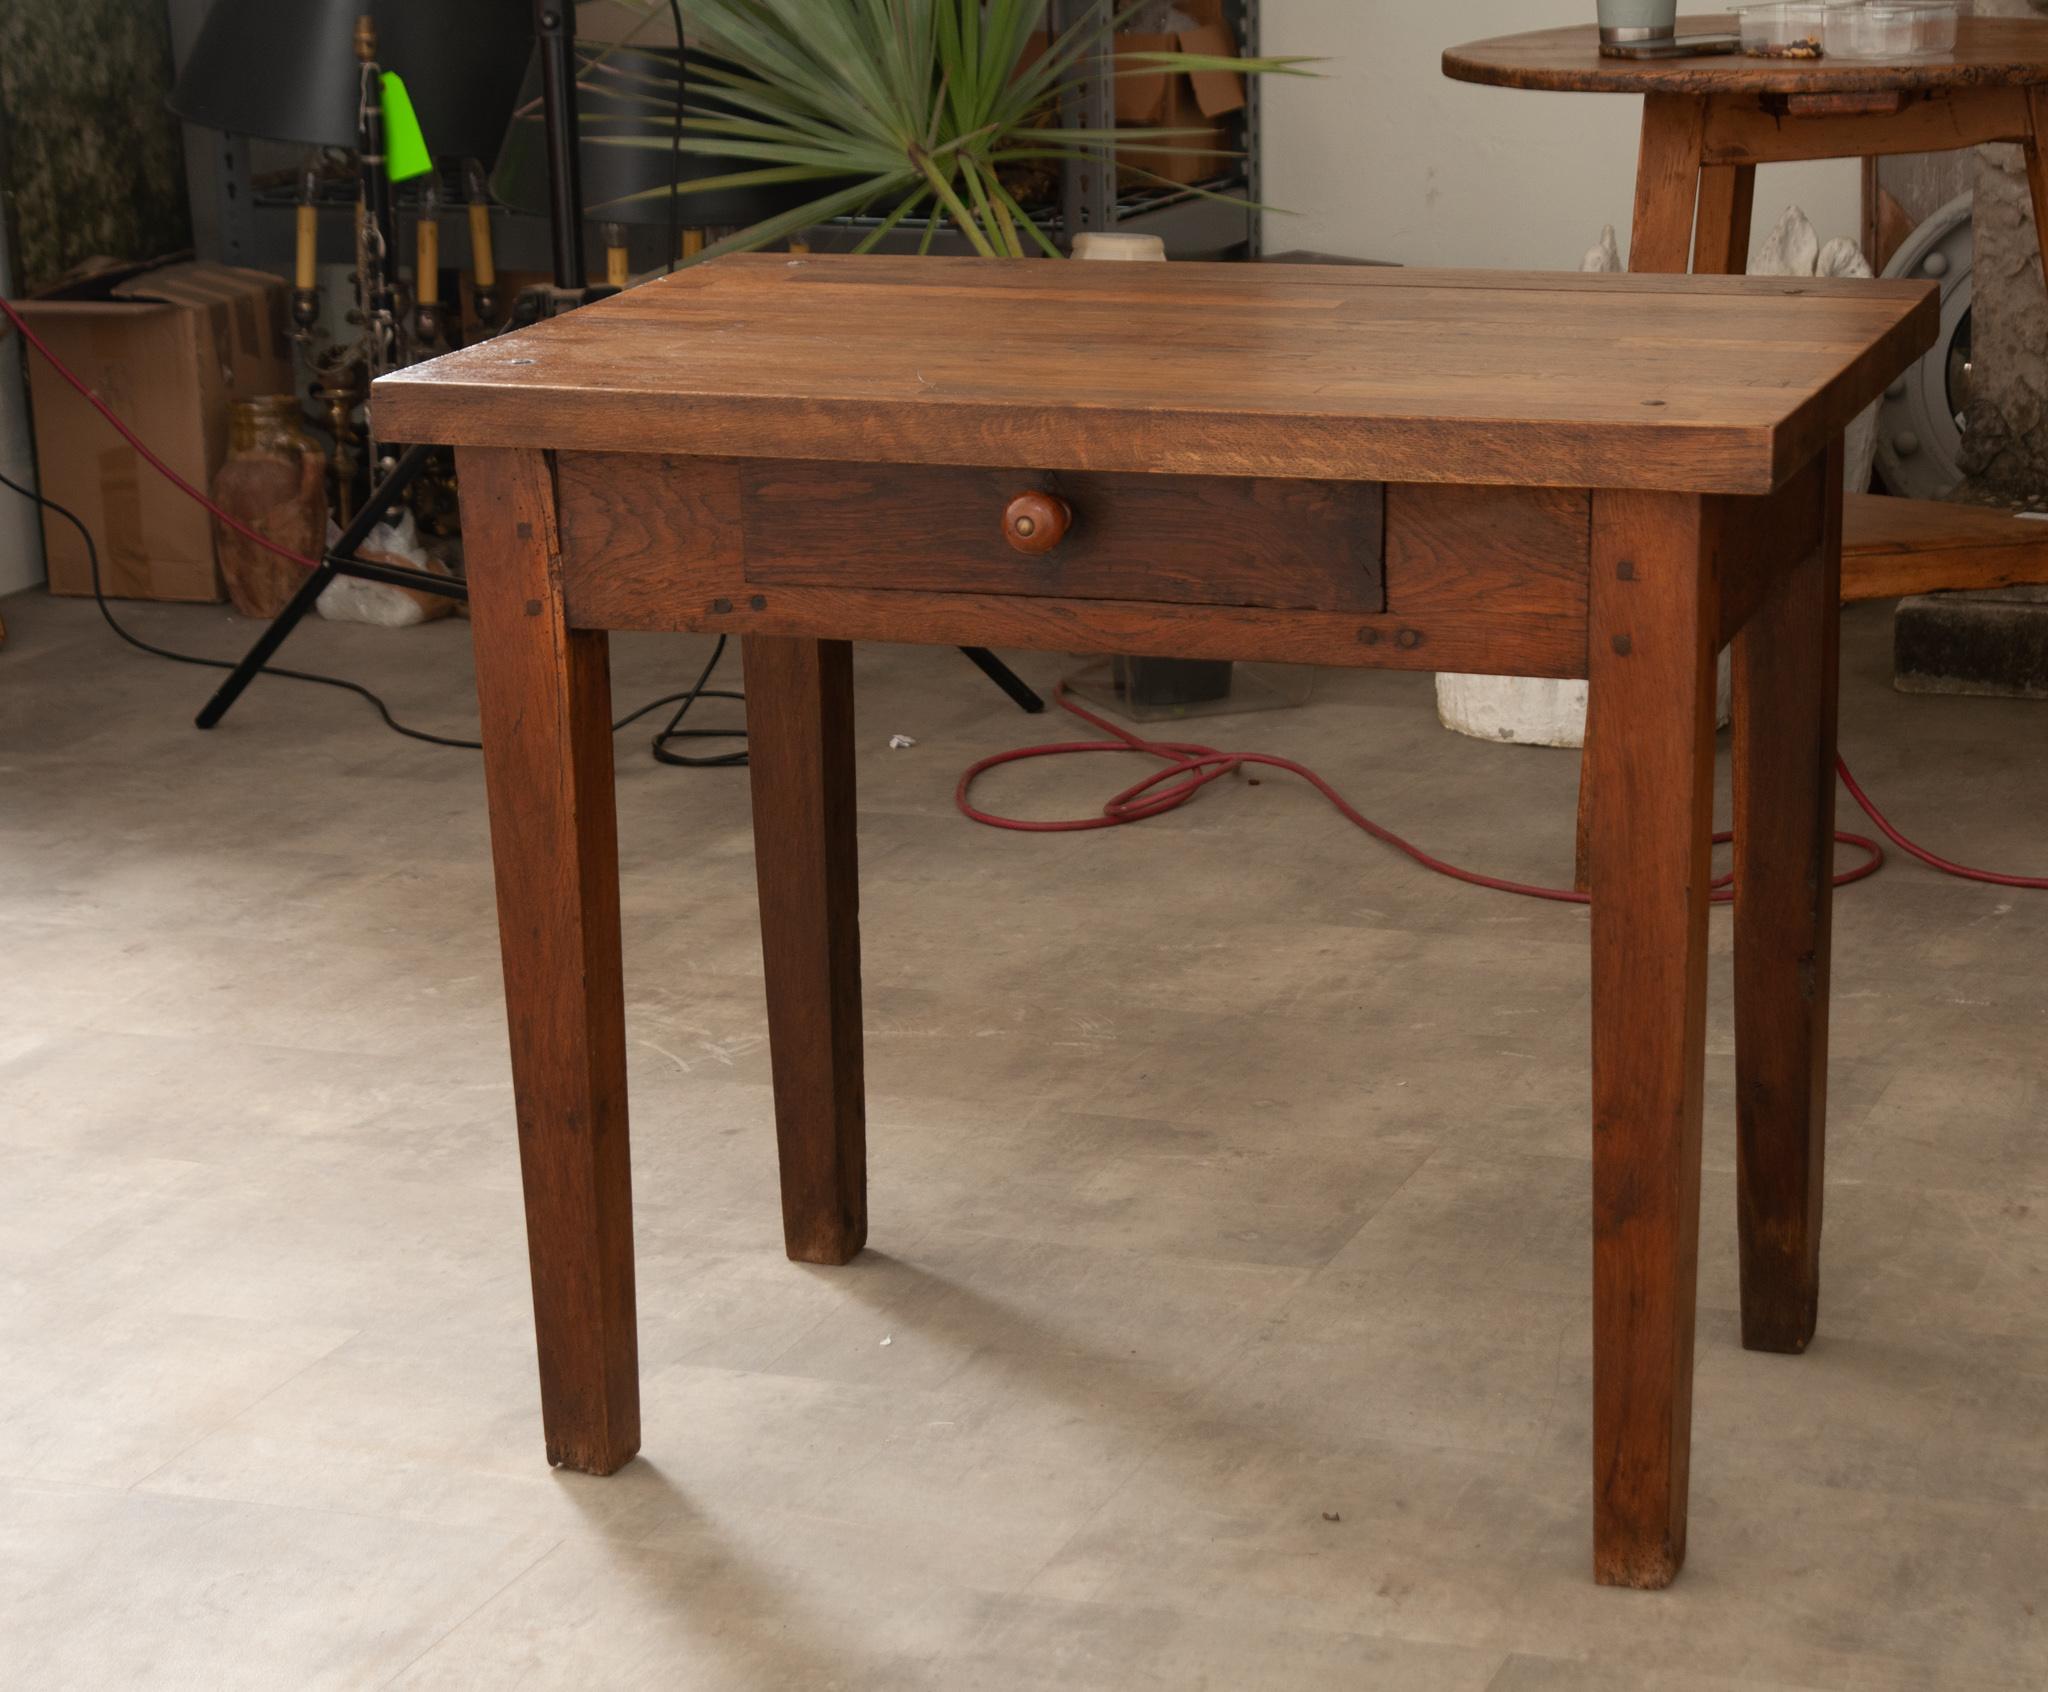 A French oak work table from the late 19th century, constructed with peg joinery and featuring a thick top, protruding corners, single drawer, and tapered legs. Created in Burgundy, France circa 1890 and used as a kitchen prep table, this piece has